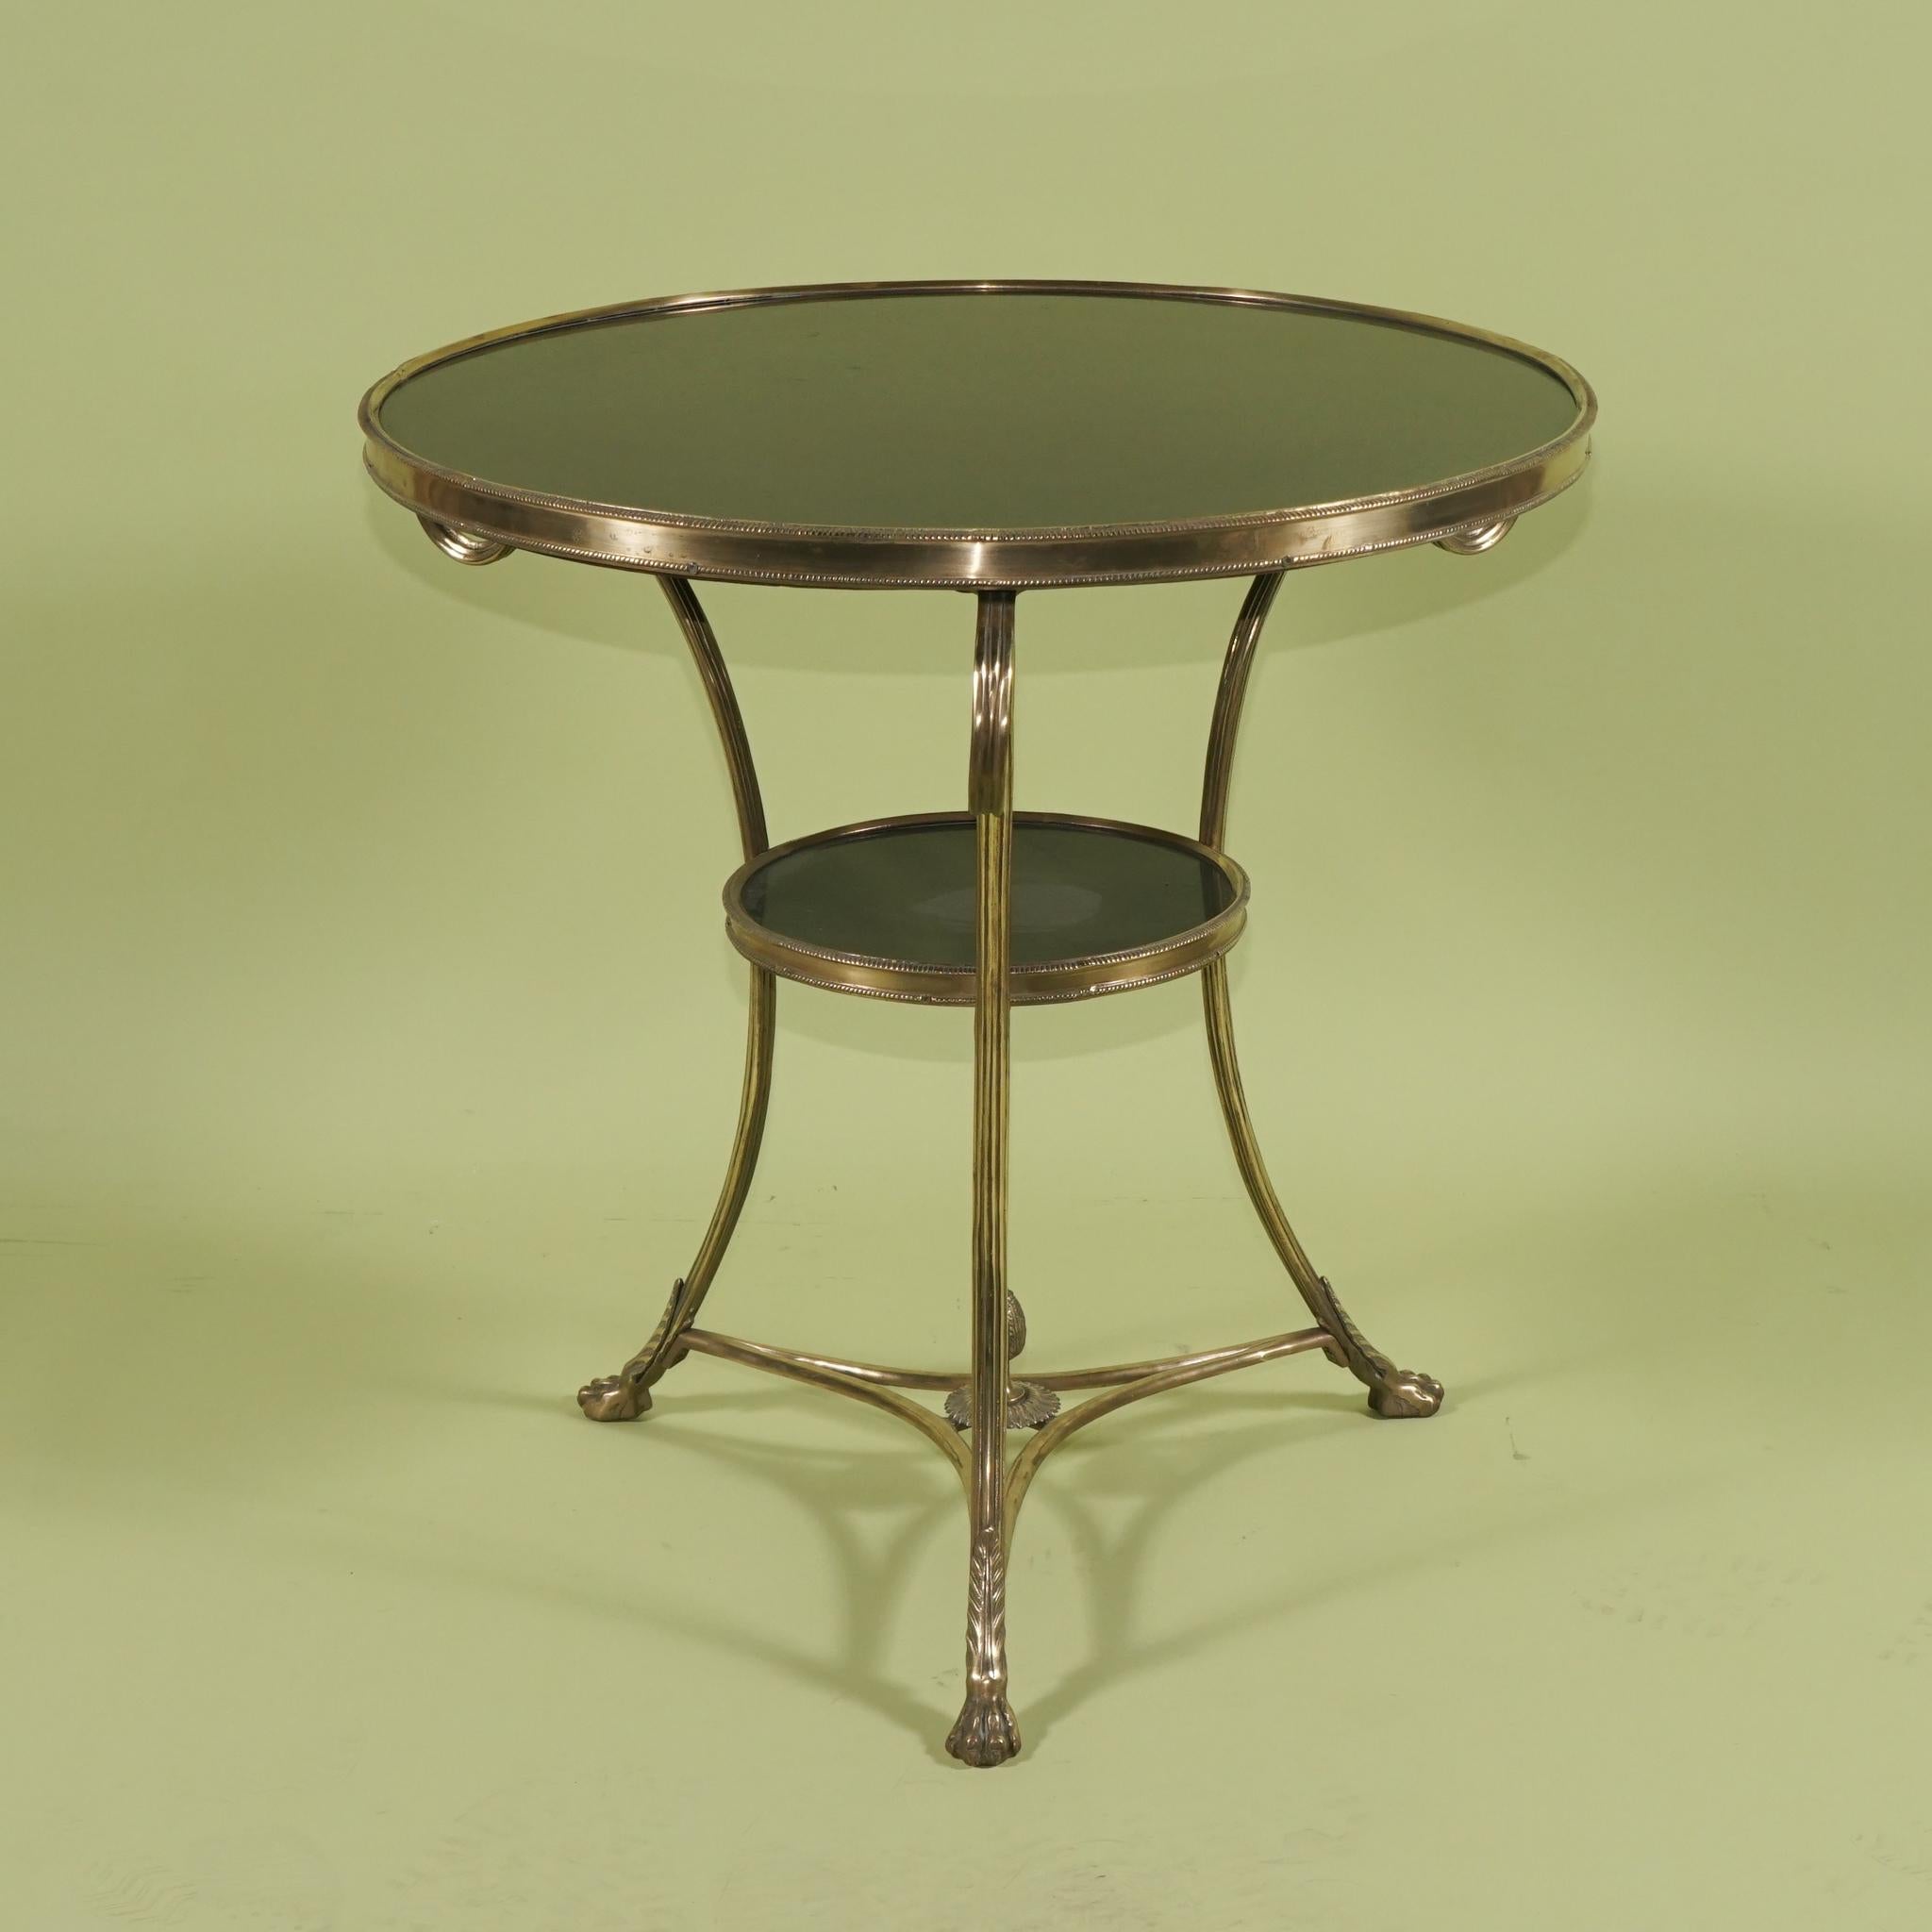 French Polished Bronze 20th Century Gueridon with Black Marble Top & Shelf